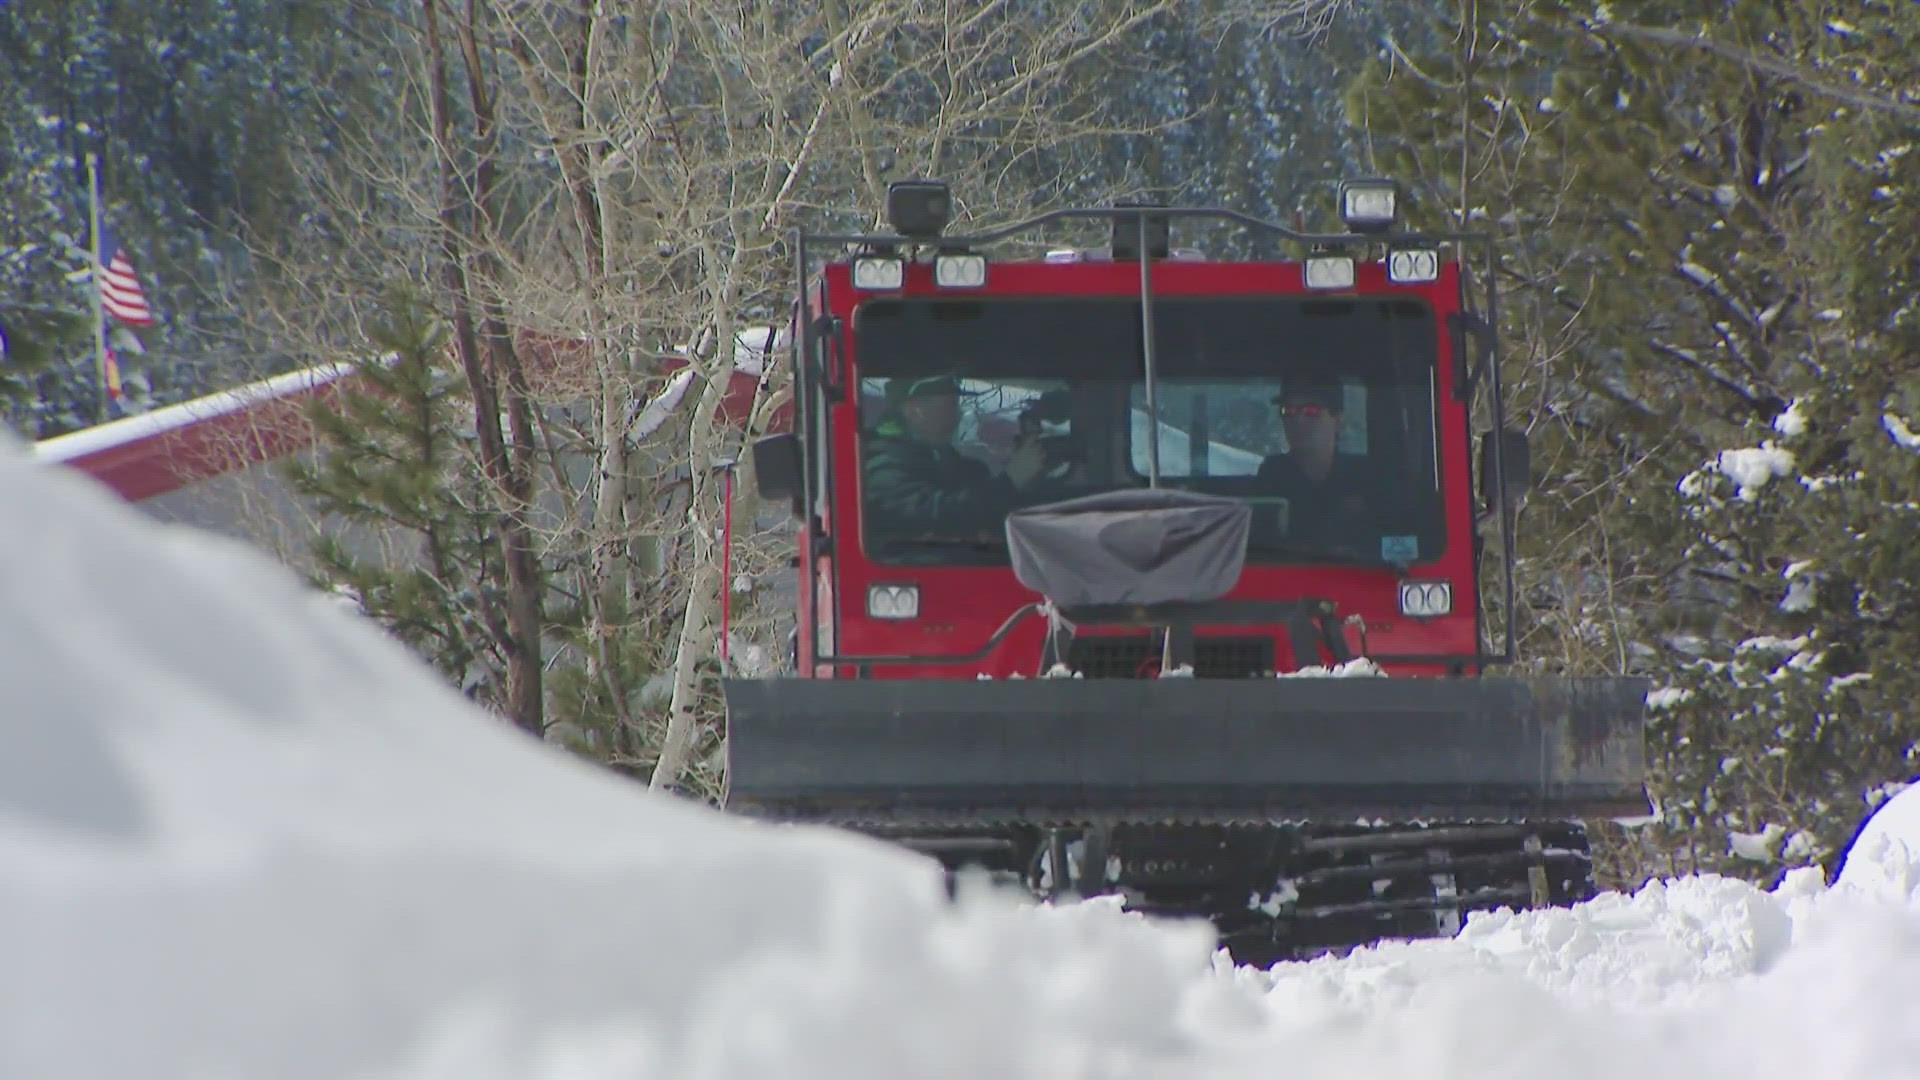 The Clear Creek County Sheriff's Office rescued multiple people who got stranded on side roads in the mountain county during the massive March snowstorm.